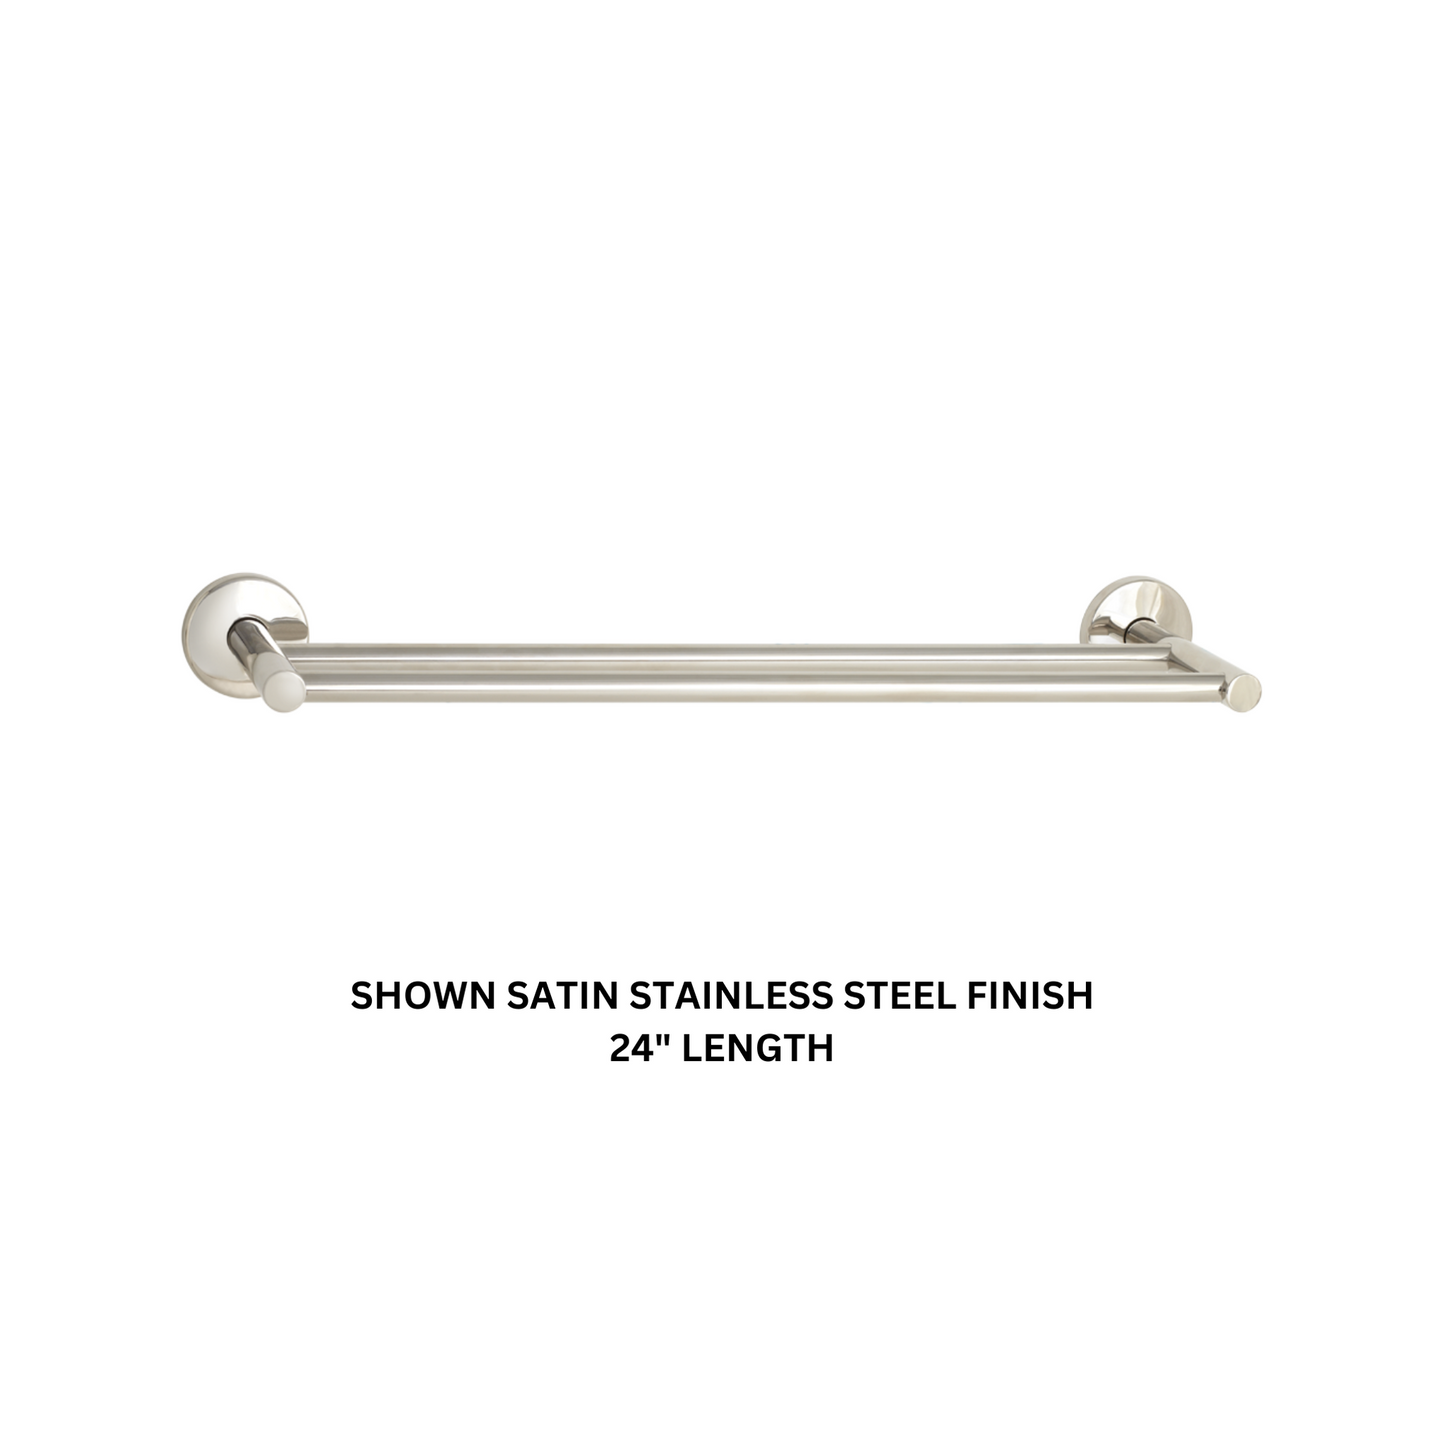 Seachrome Conorado Series 18" Almond Powder Coat Concealed Mounting Flange Double Towel Bar